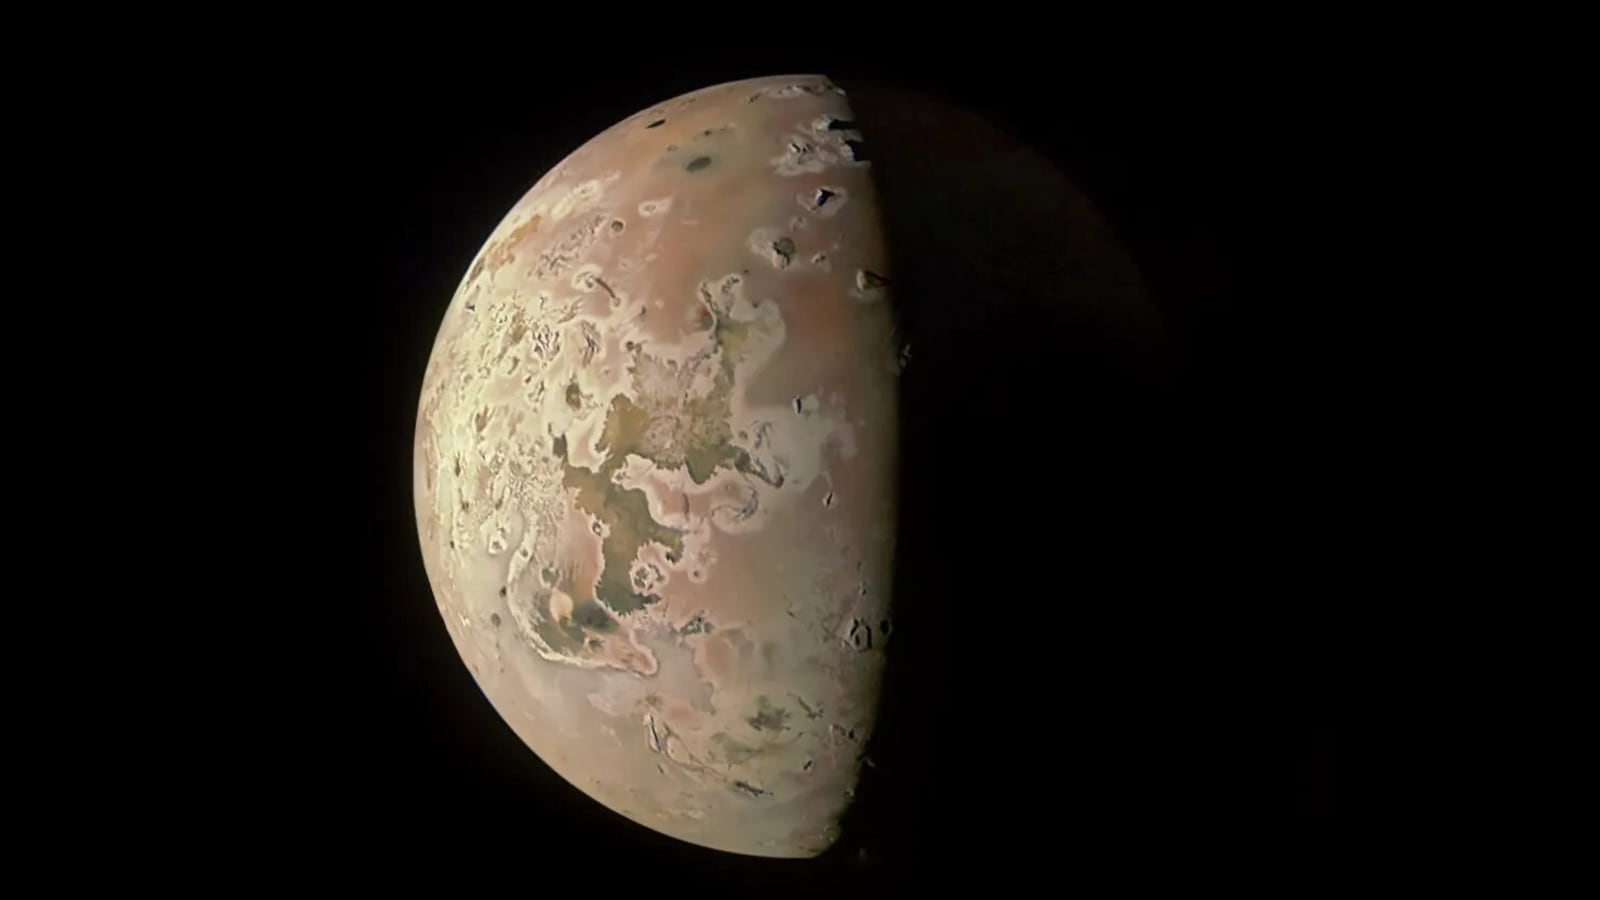 NASA’s Juno spacecraft set for historic encounter with Jupiter’s volcanic moon Io; check date